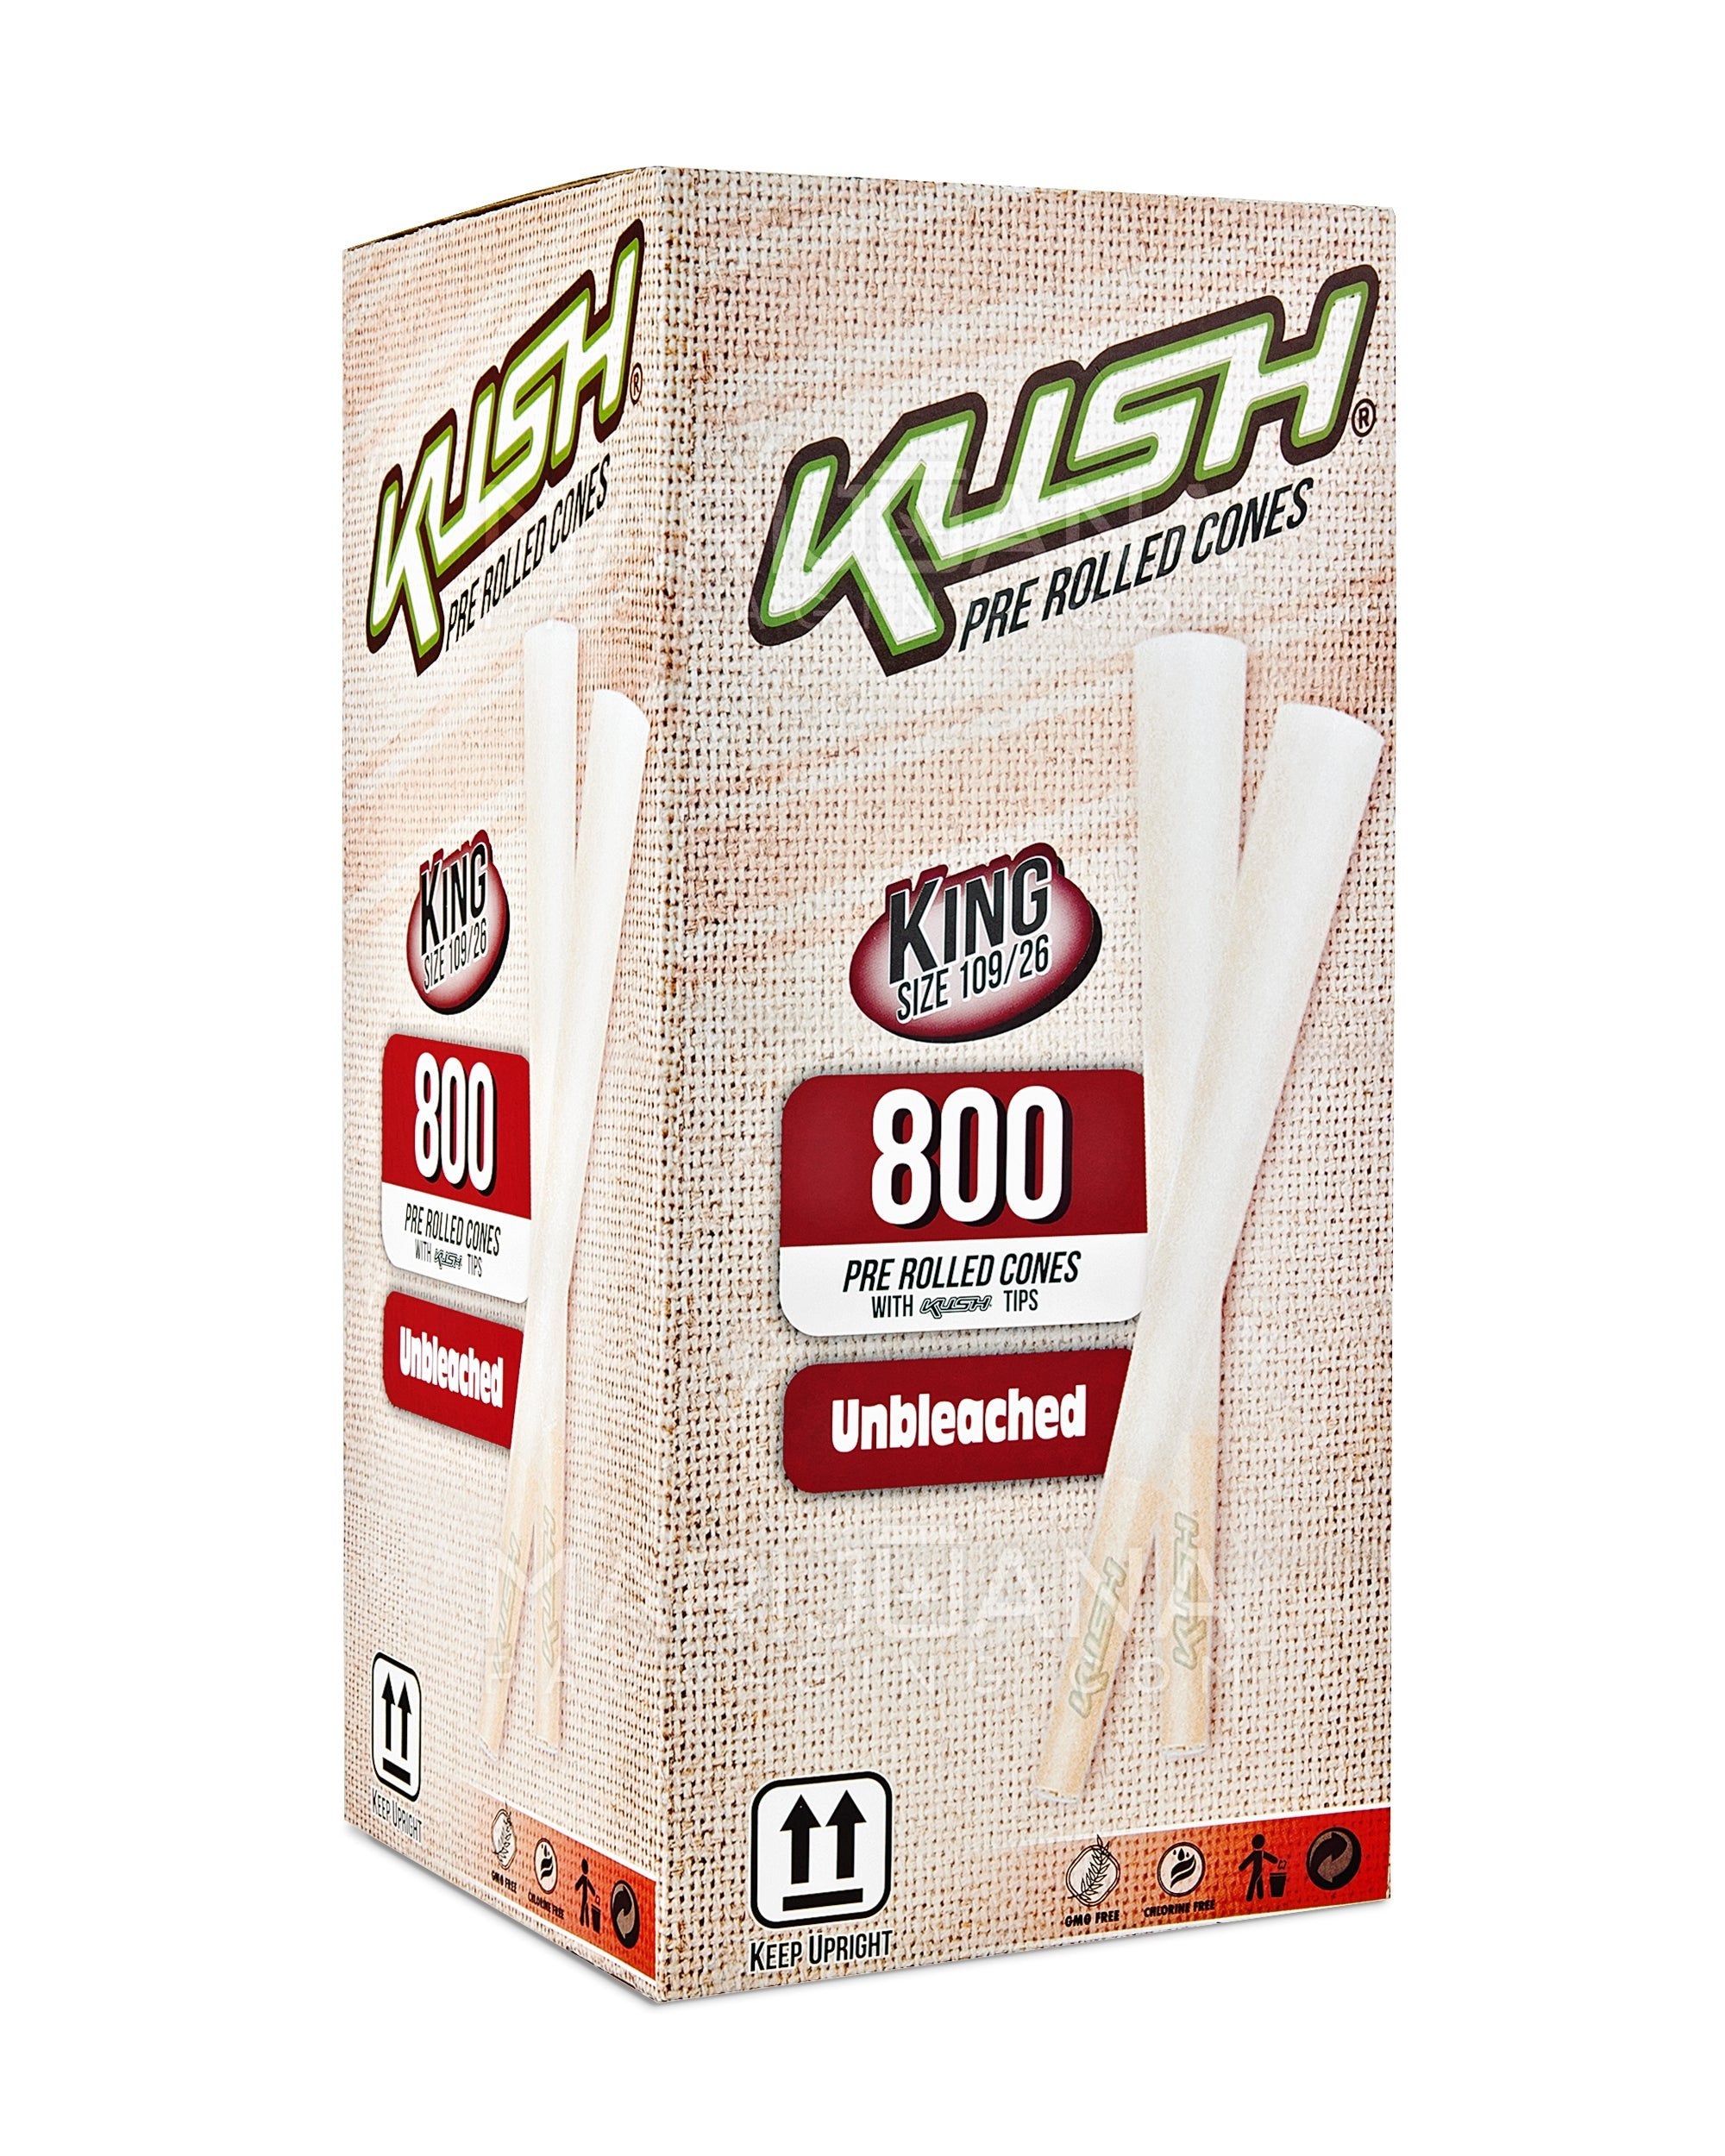 KUSH | Unbleached King Size Pre-Rolled Cones w/ Filter Tip | 109mm - Brown Paper - 800 Count - 1